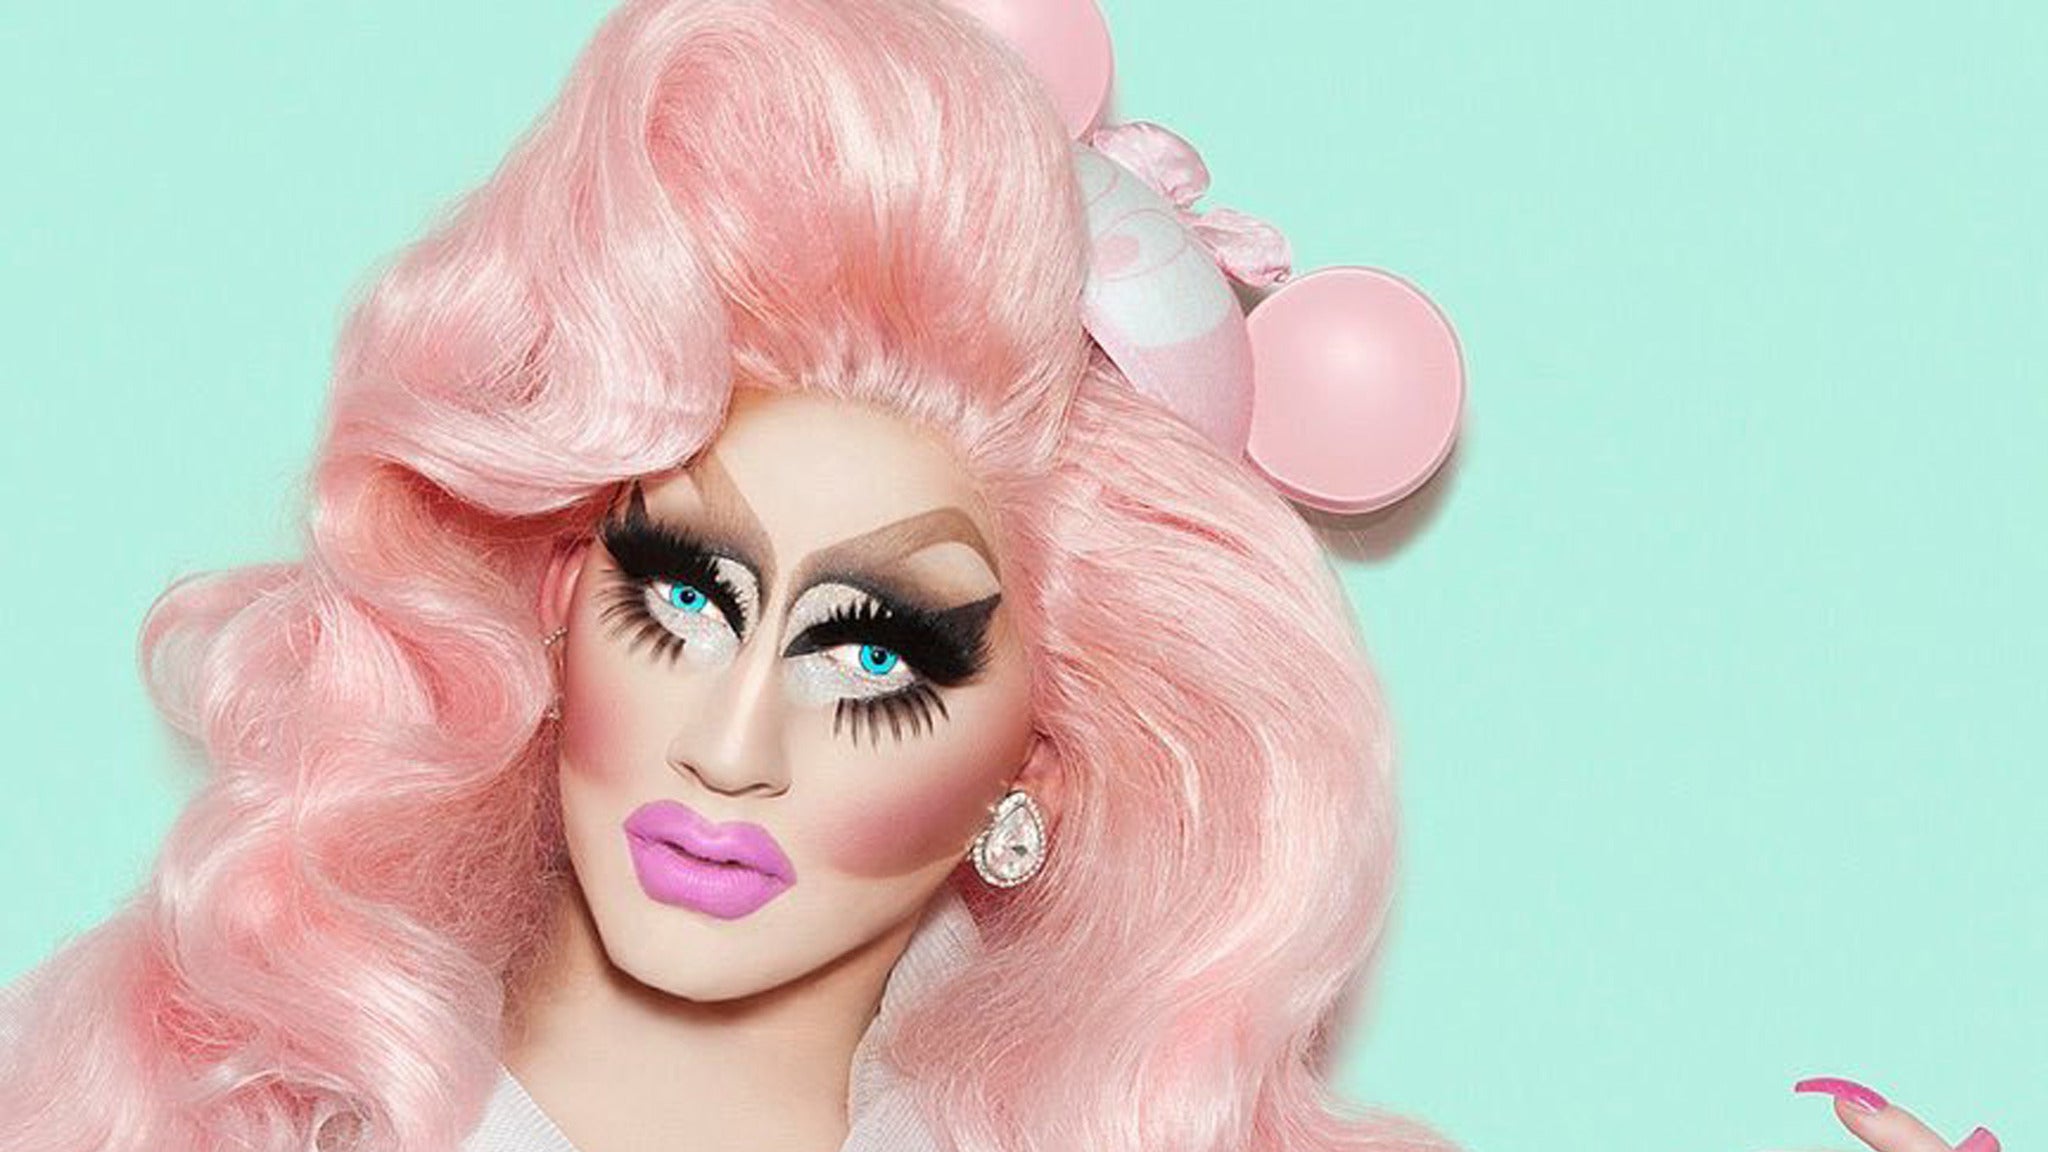 Trixie Mattel: Grown Up in Seattle promo photo for Meet & Greet Experiences Onsale presale offer code